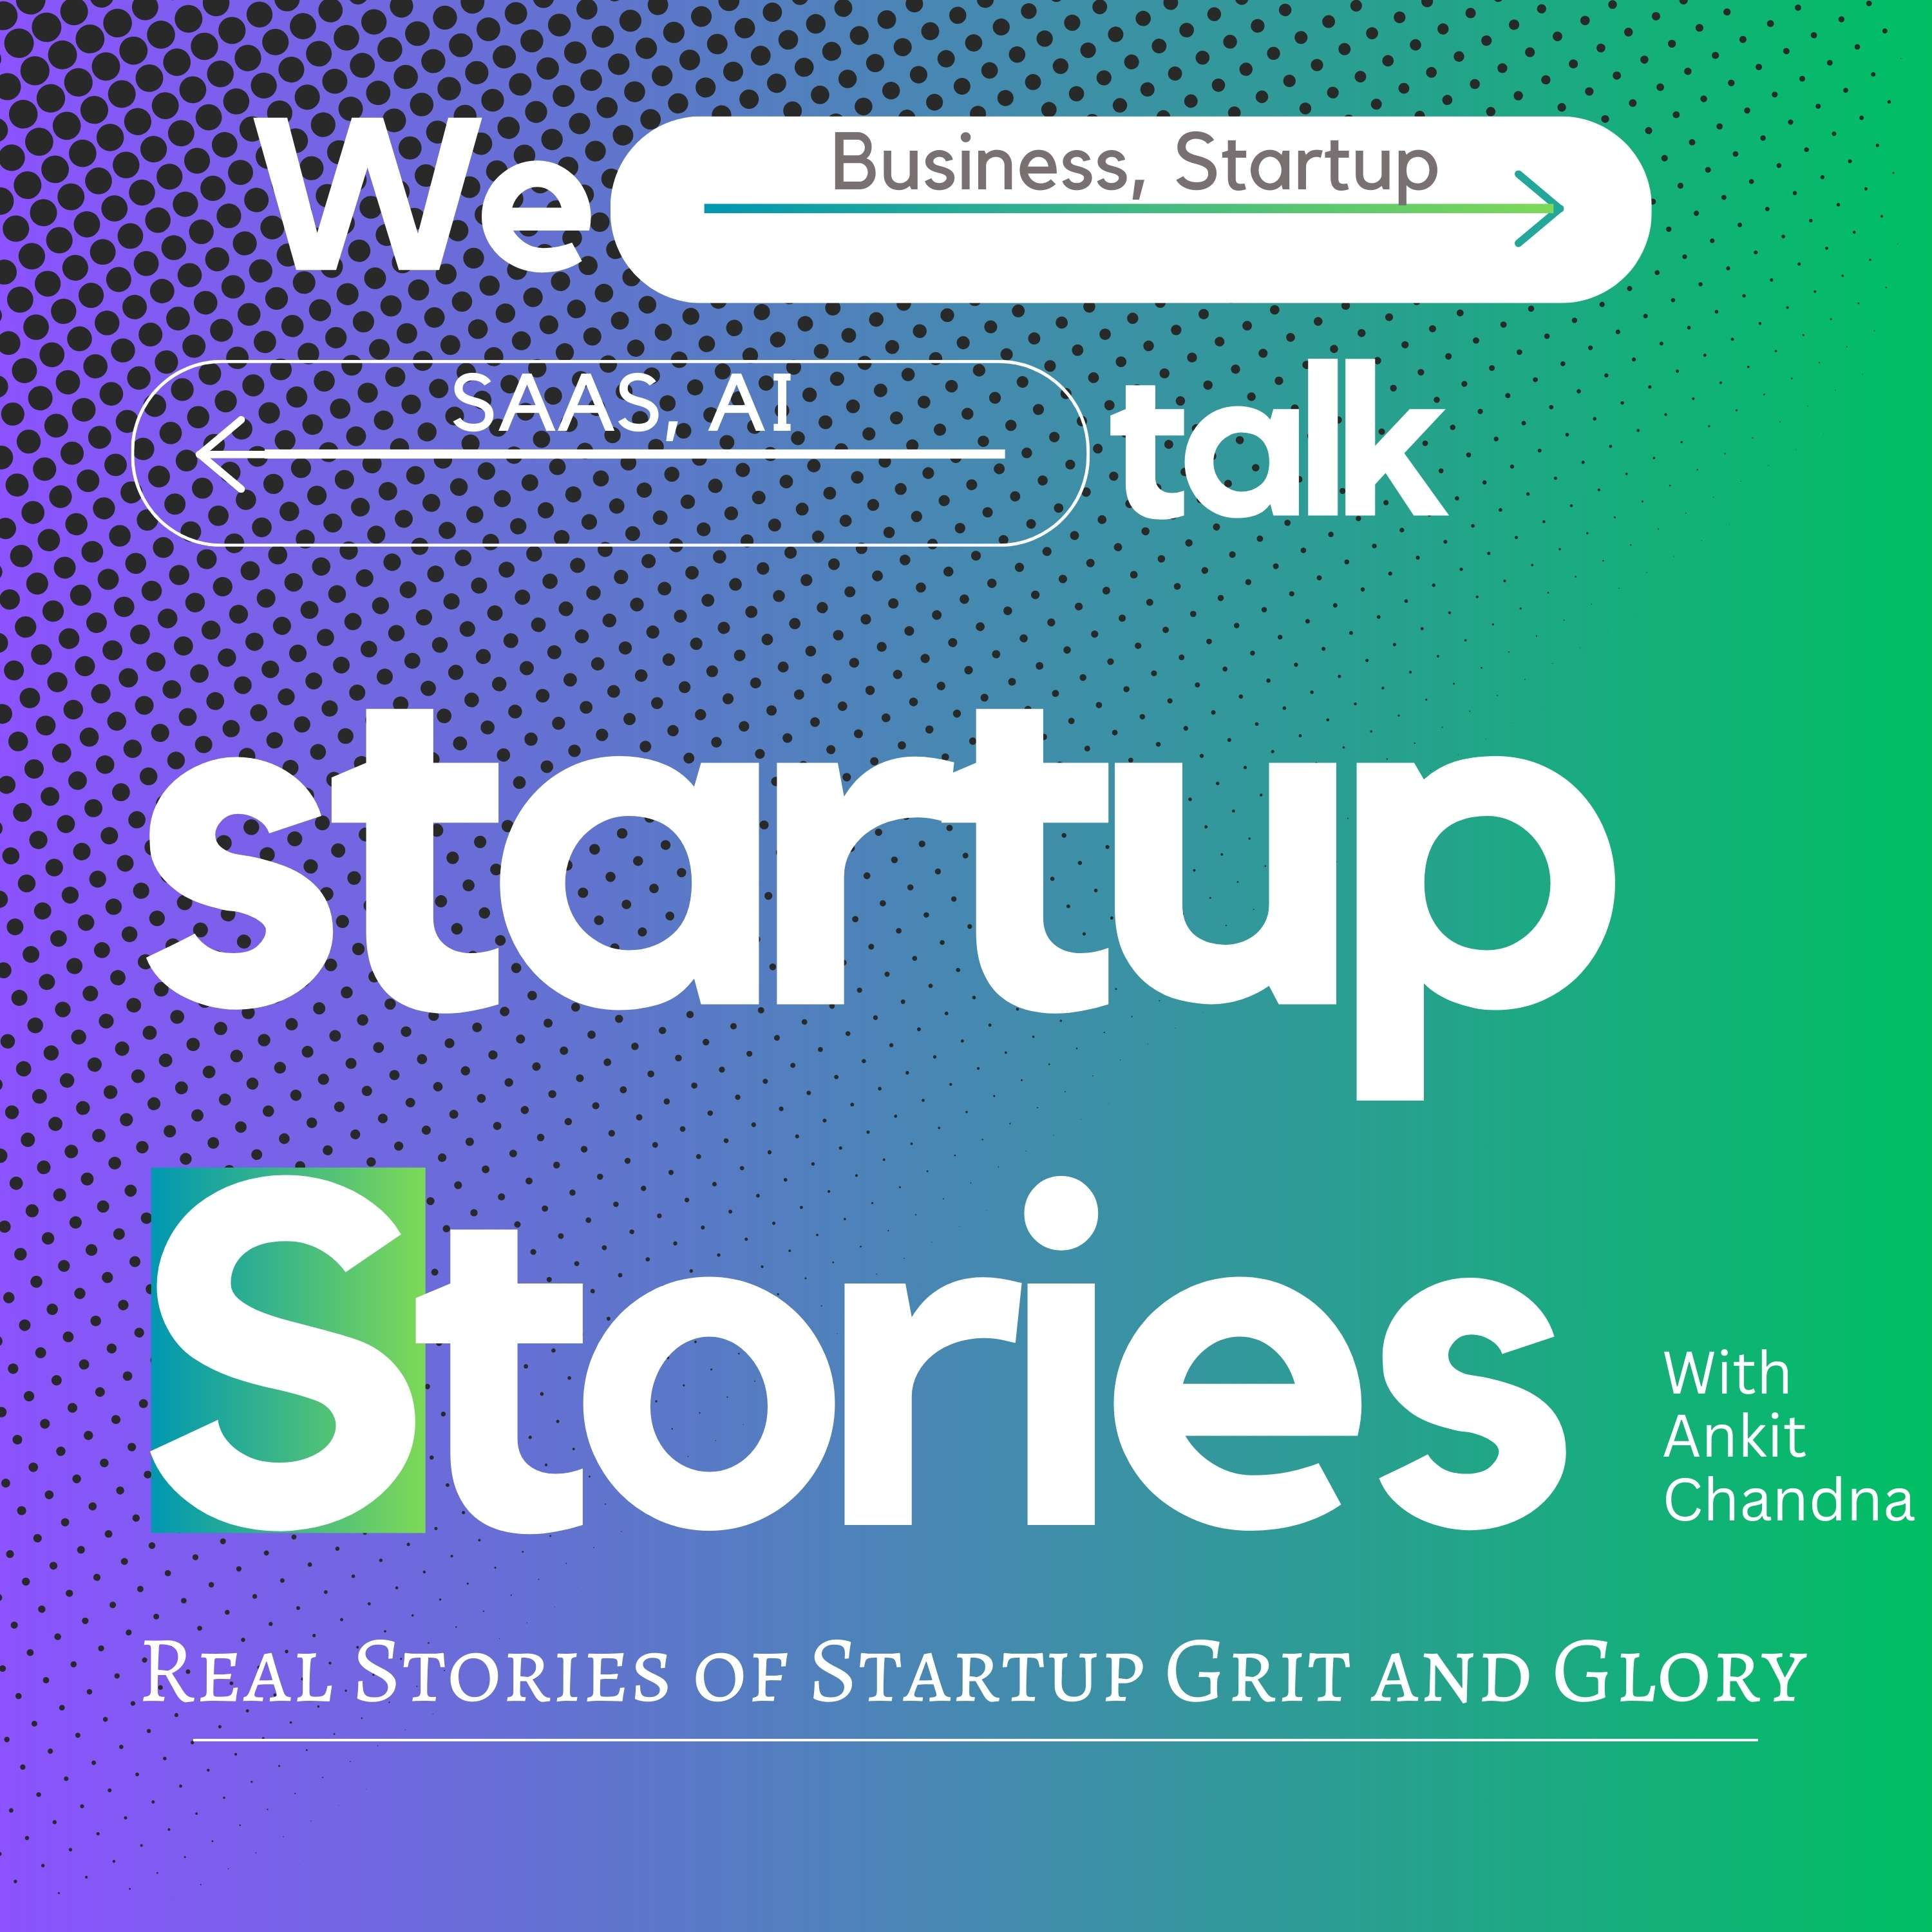 Join our news letter to get exclusive startup stories